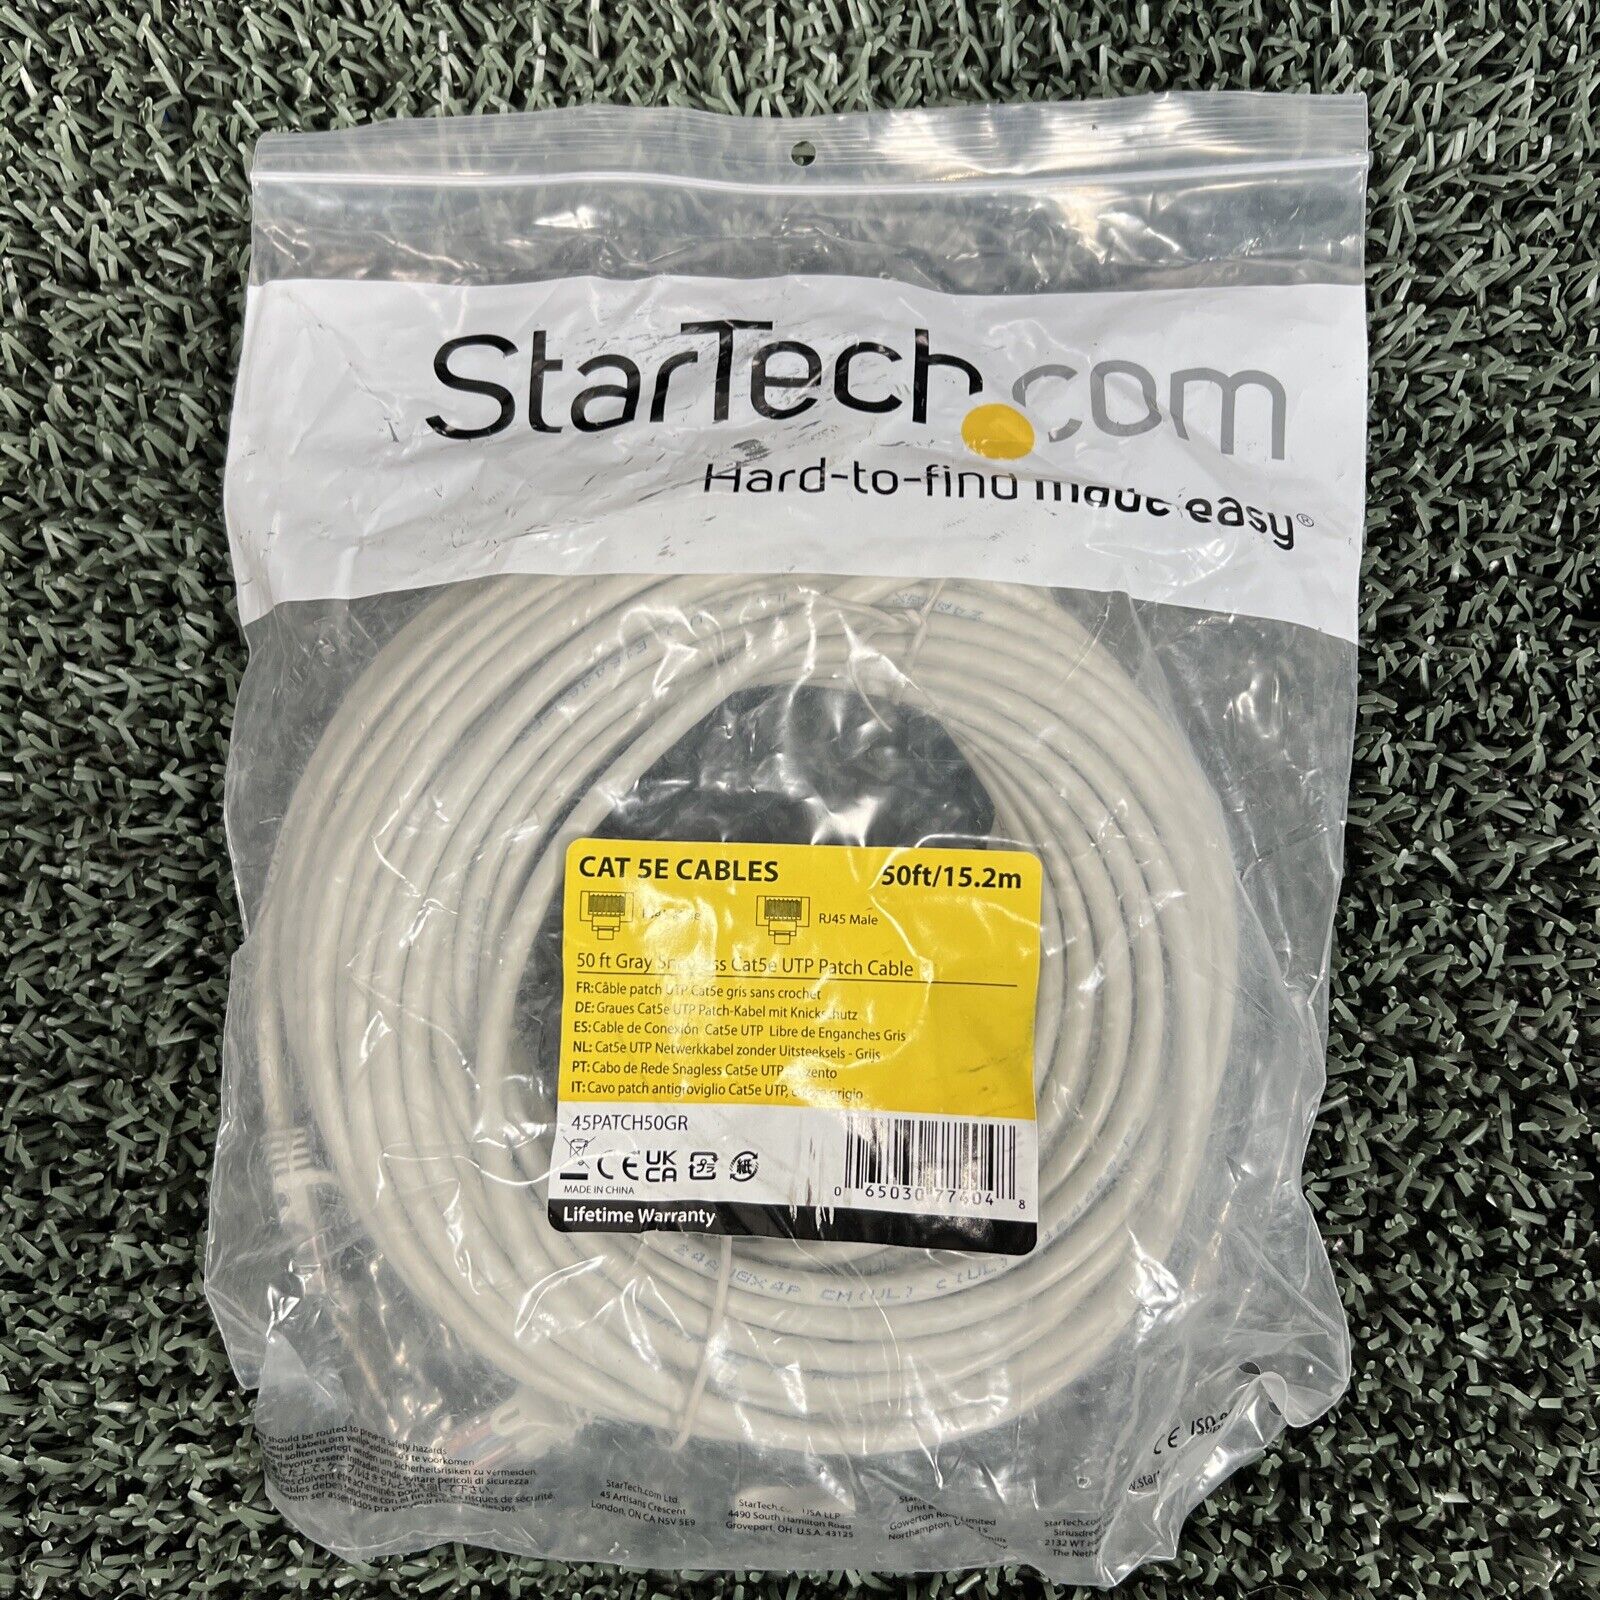 StarTech.com Cat5e Patch Cable with Snagless RJ45 Connectors - 50 ft, Gray (#84)